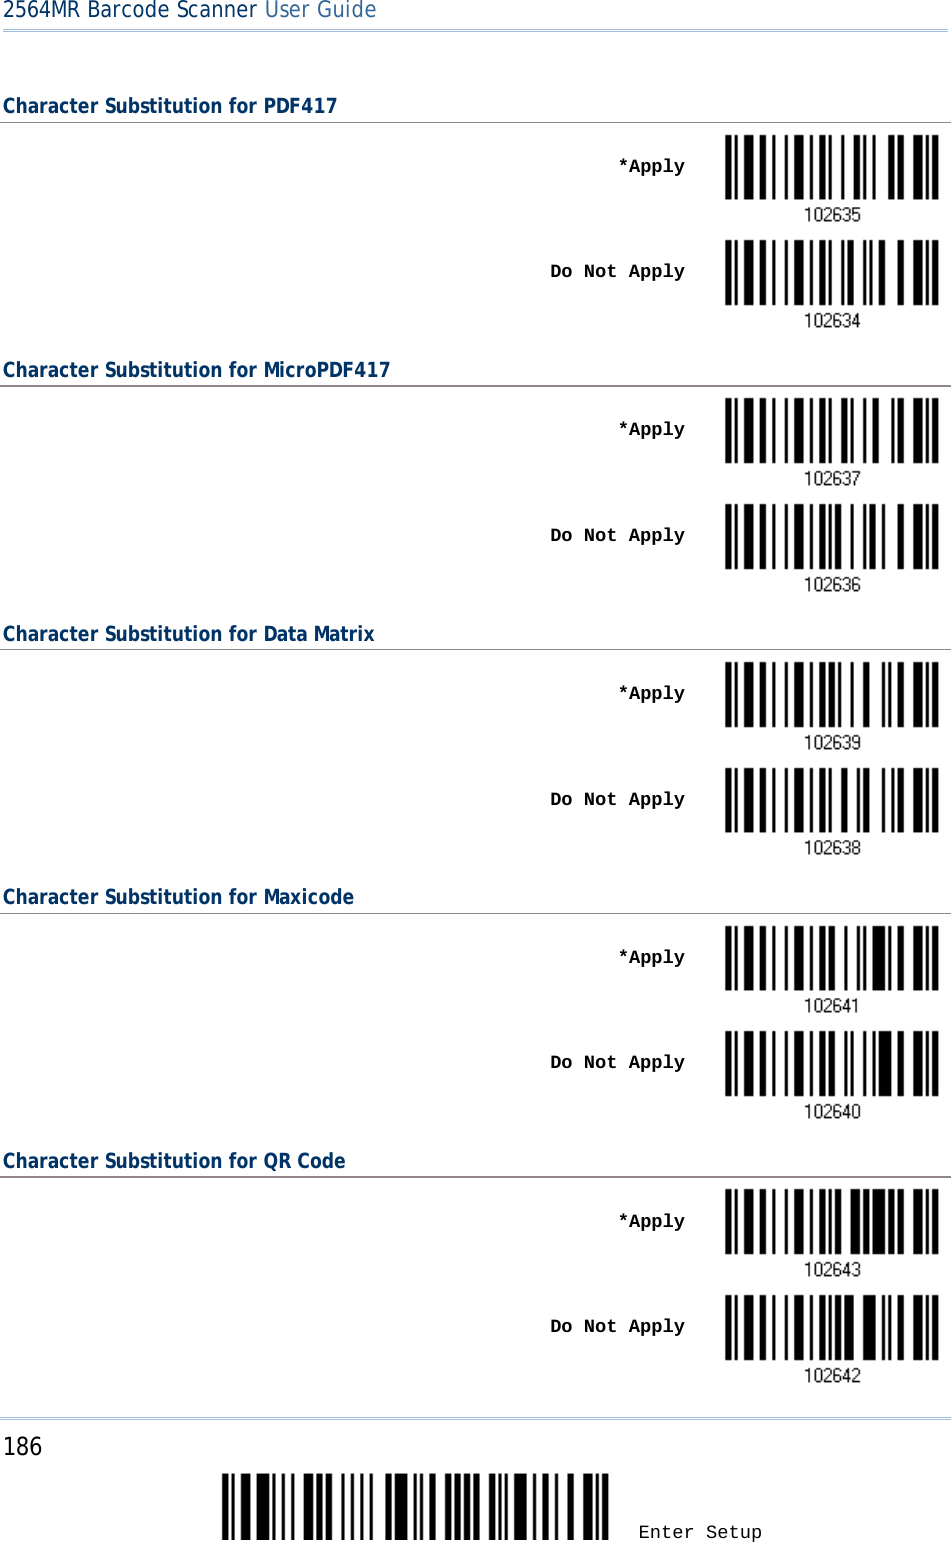 2564MR Barcode Scanner User Guide  Character Substitution for PDF417    *Apply     Do Not Apply  Character Substitution for MicroPDF417    *Apply     Do Not Apply  Character Substitution for Data Matrix    *Apply     Do Not Apply  Character Substitution for Maxicode    *Apply     Do Not Apply  Character Substitution for QR Code    *Apply     Do Not Apply  186 Enter Setup 